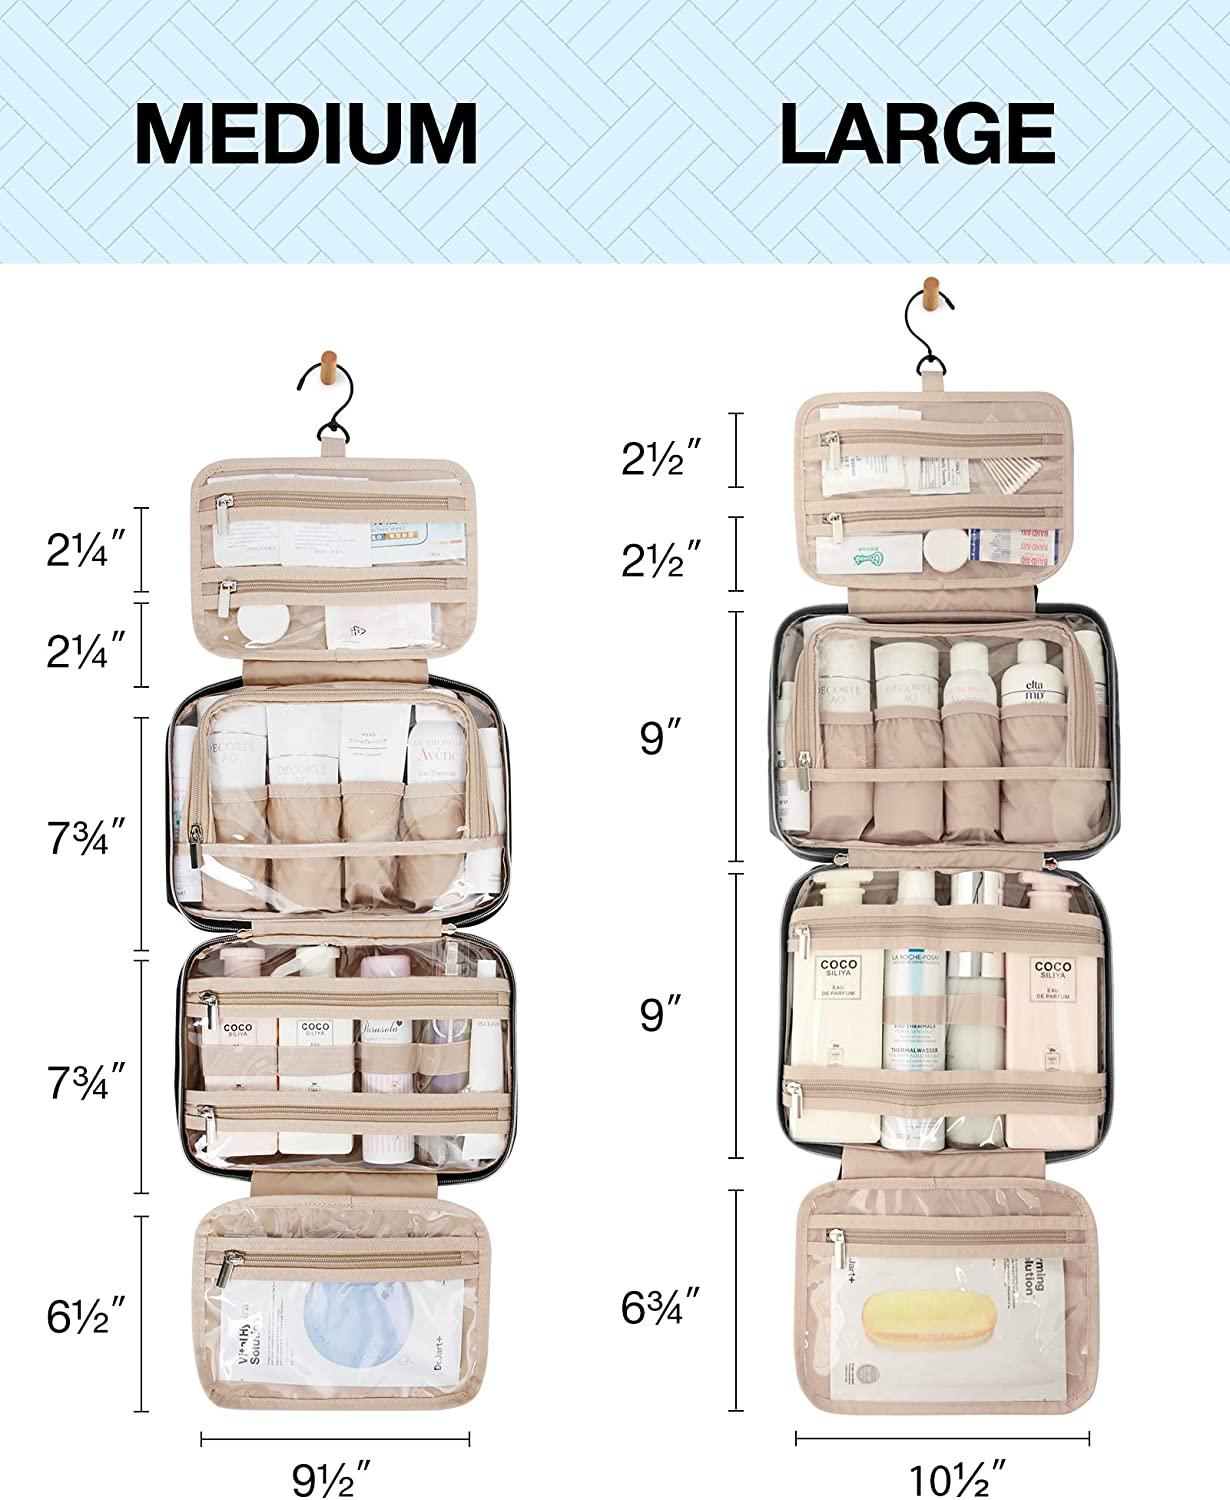 Hanging Travel Toiletry Bag - Large Cosmetics, Makeup And